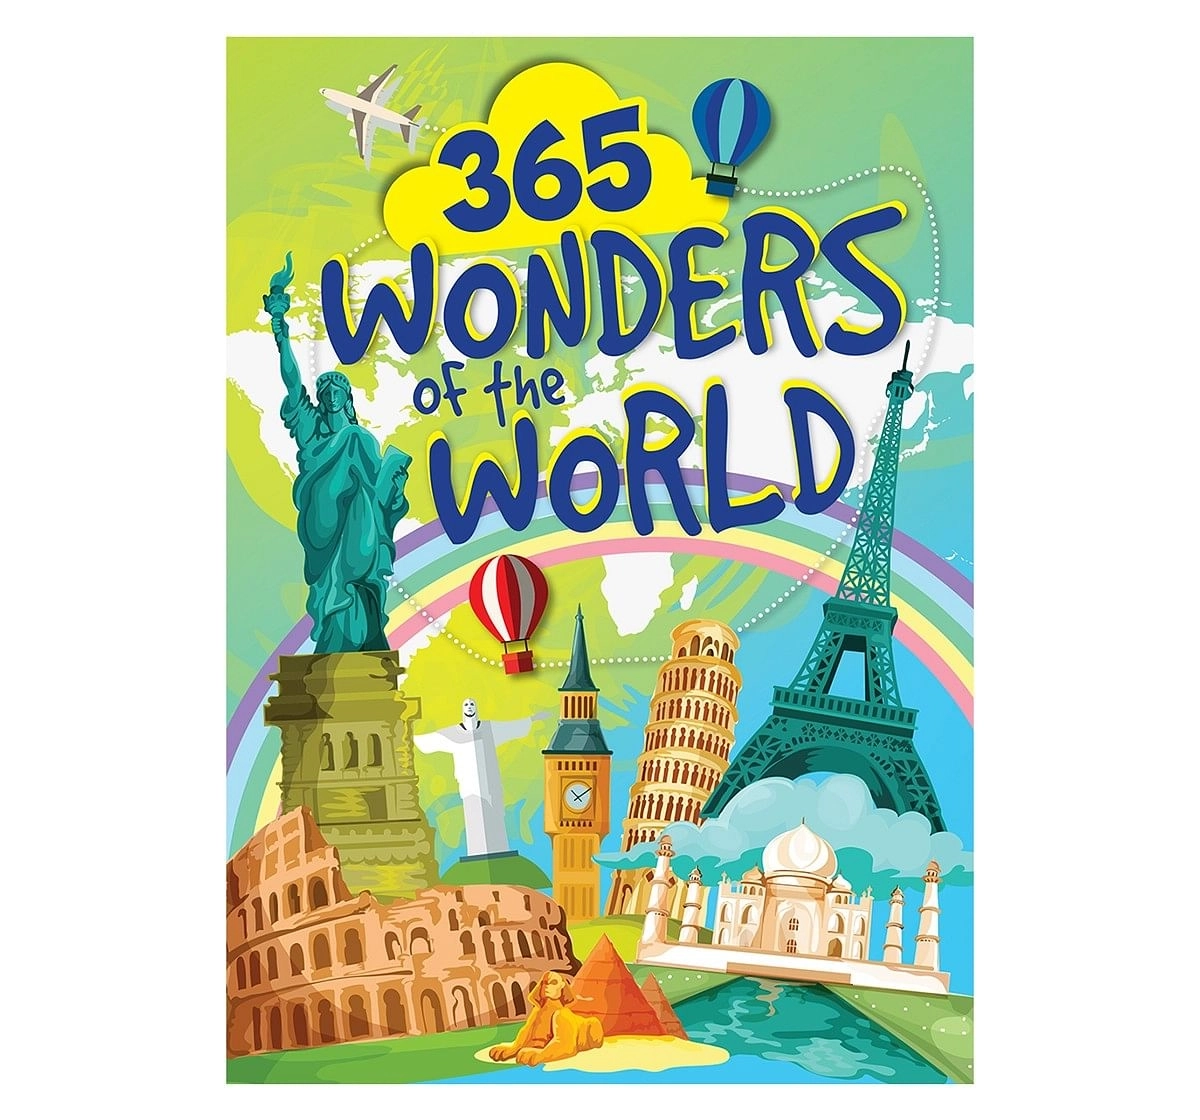 Om Books: 365 Wonders of the World, 236 Pages, Hardcover